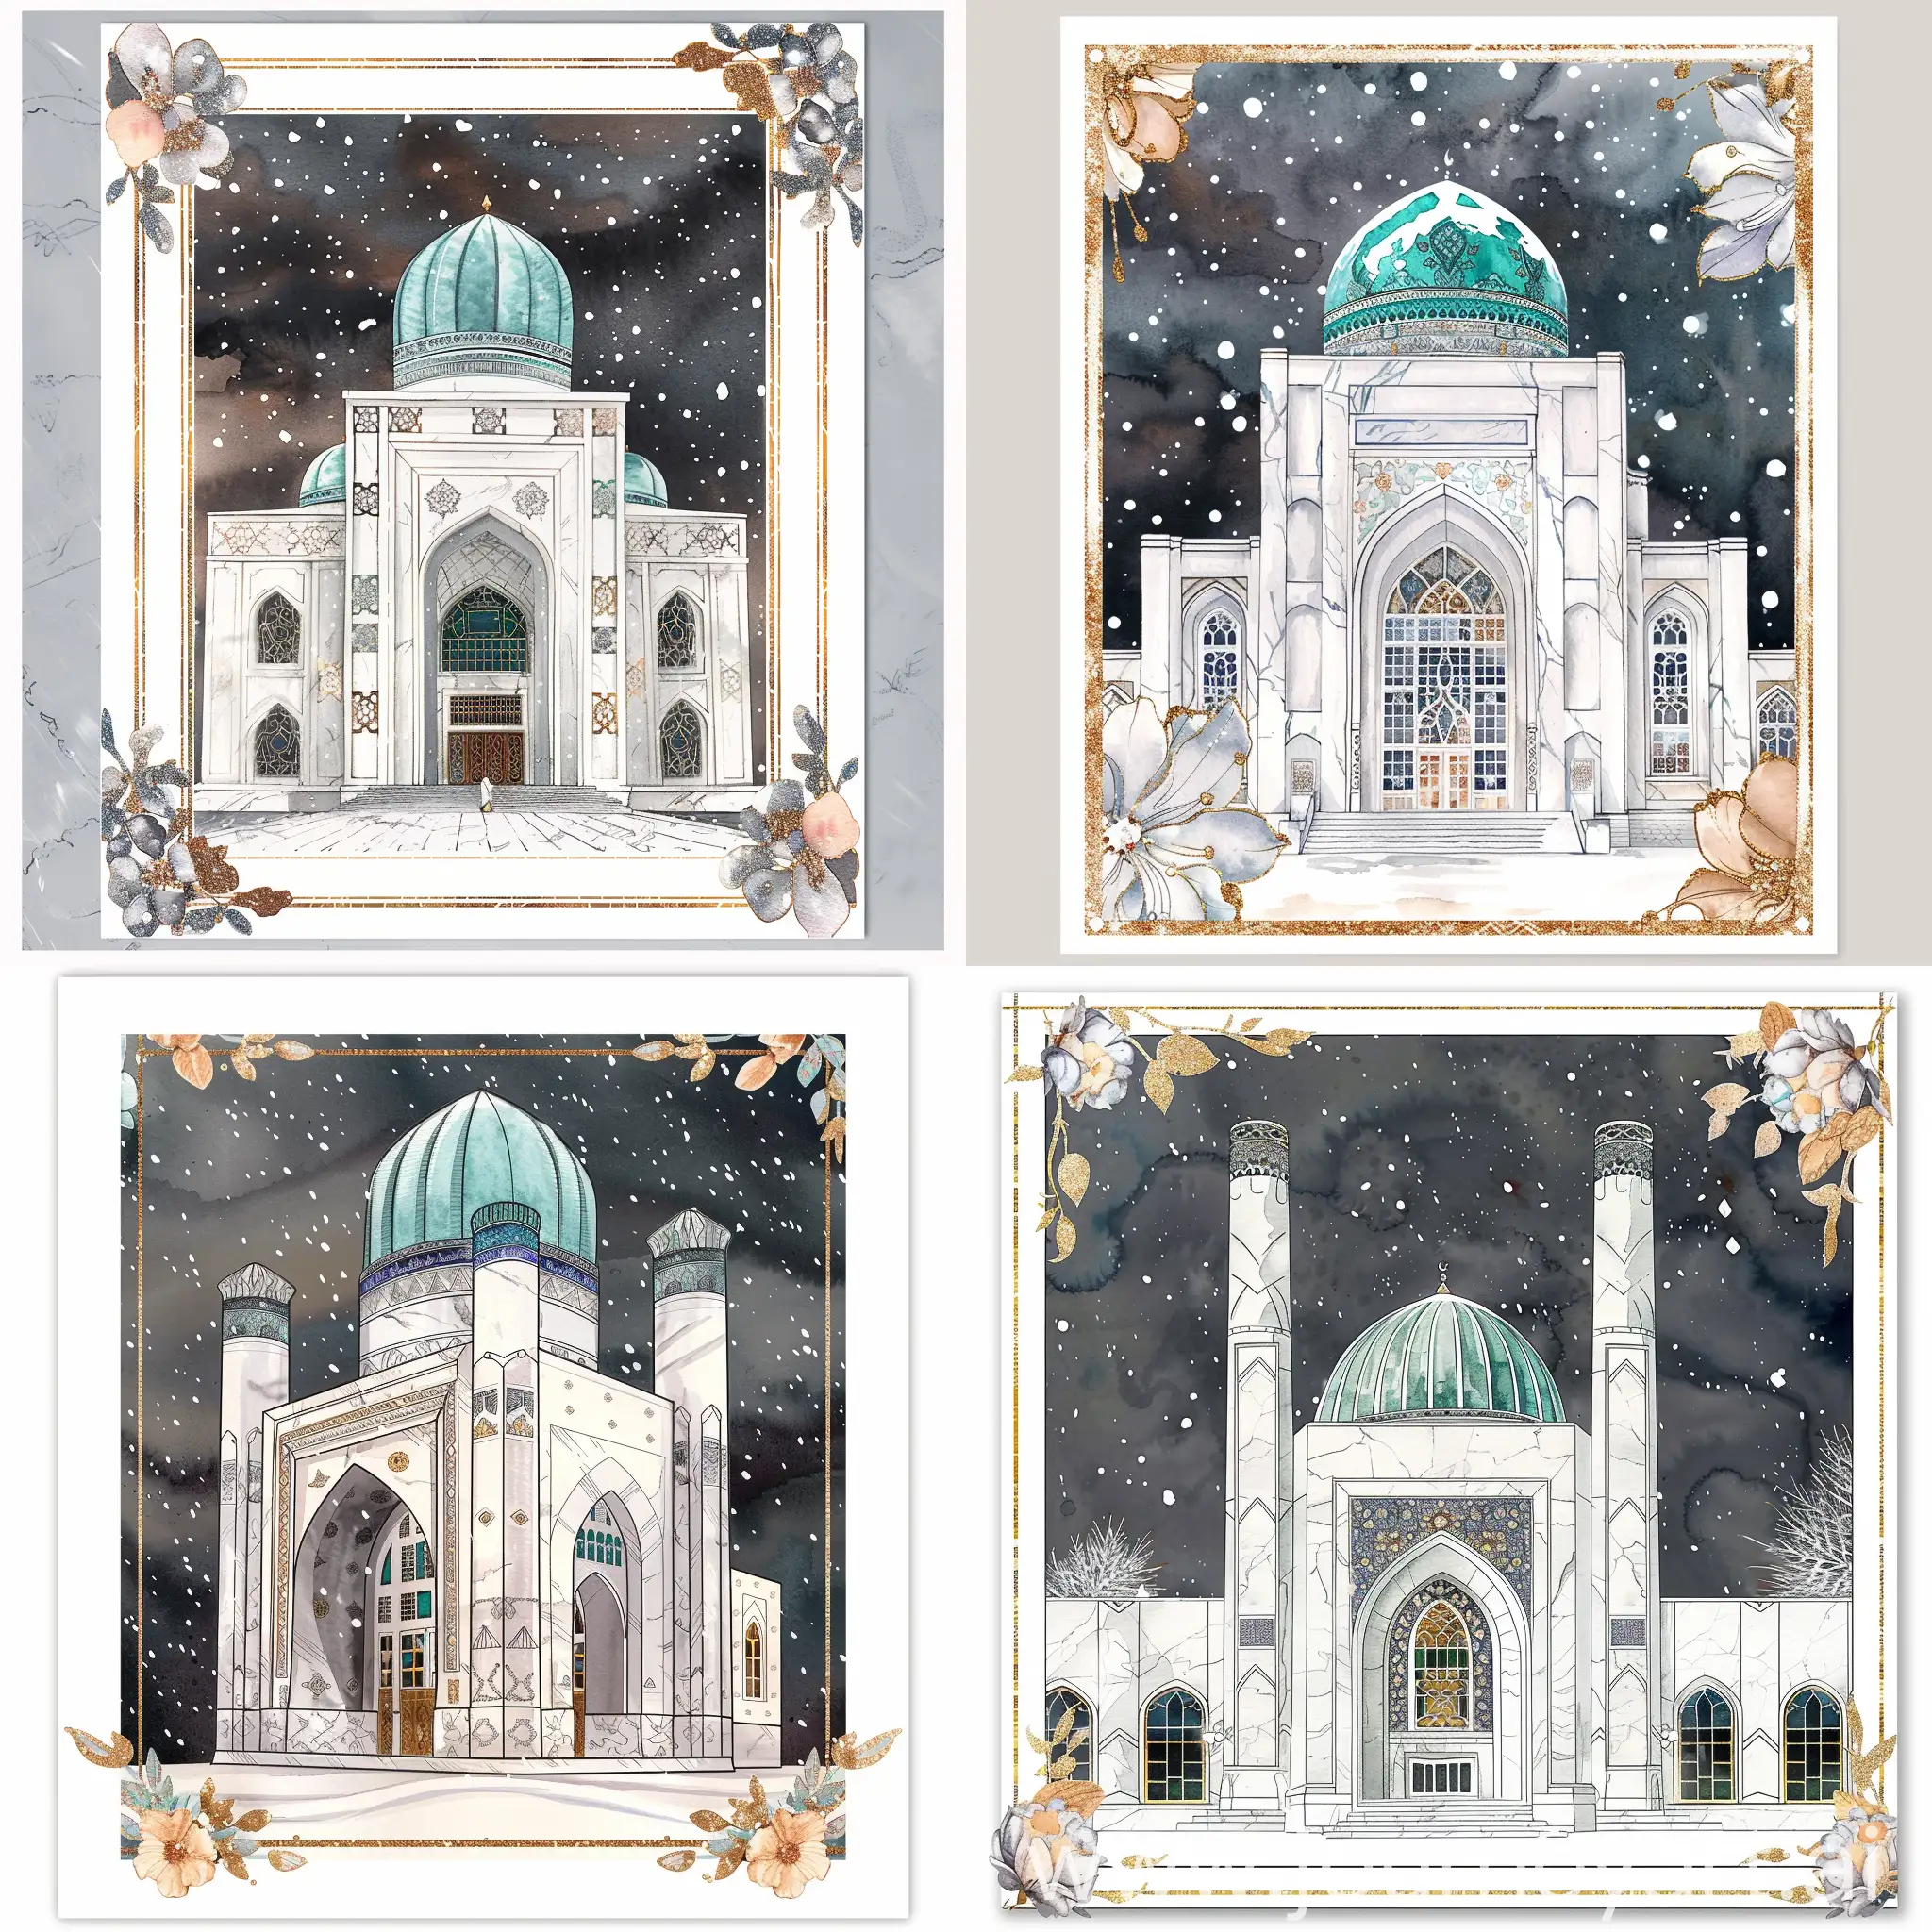 watercolor art on white border greeting card, depicting a perfect sketch of tall iwan Uzbekistan mosque having modern white marbled facade, front view, persian tile floral motifs decorations on mosque, arched stained glass windows, Turquoise dome, dark grey background sky, snowfall, surrounded by golden border flowers having glittering golden outlines and lavender peach color --sref https://cdn.discordapp.com/attachments/1213041174428782623/1244736914289065995/IMG_20240527_224219.jpg?ex=665d7356&is=665c21d6&hm=1a473b4cd504b9e710e3899d4d4a2ad64b42e71516d476fb813bce7c85313d35& --sw 999 --s 999 --style raw --ar 2:3 